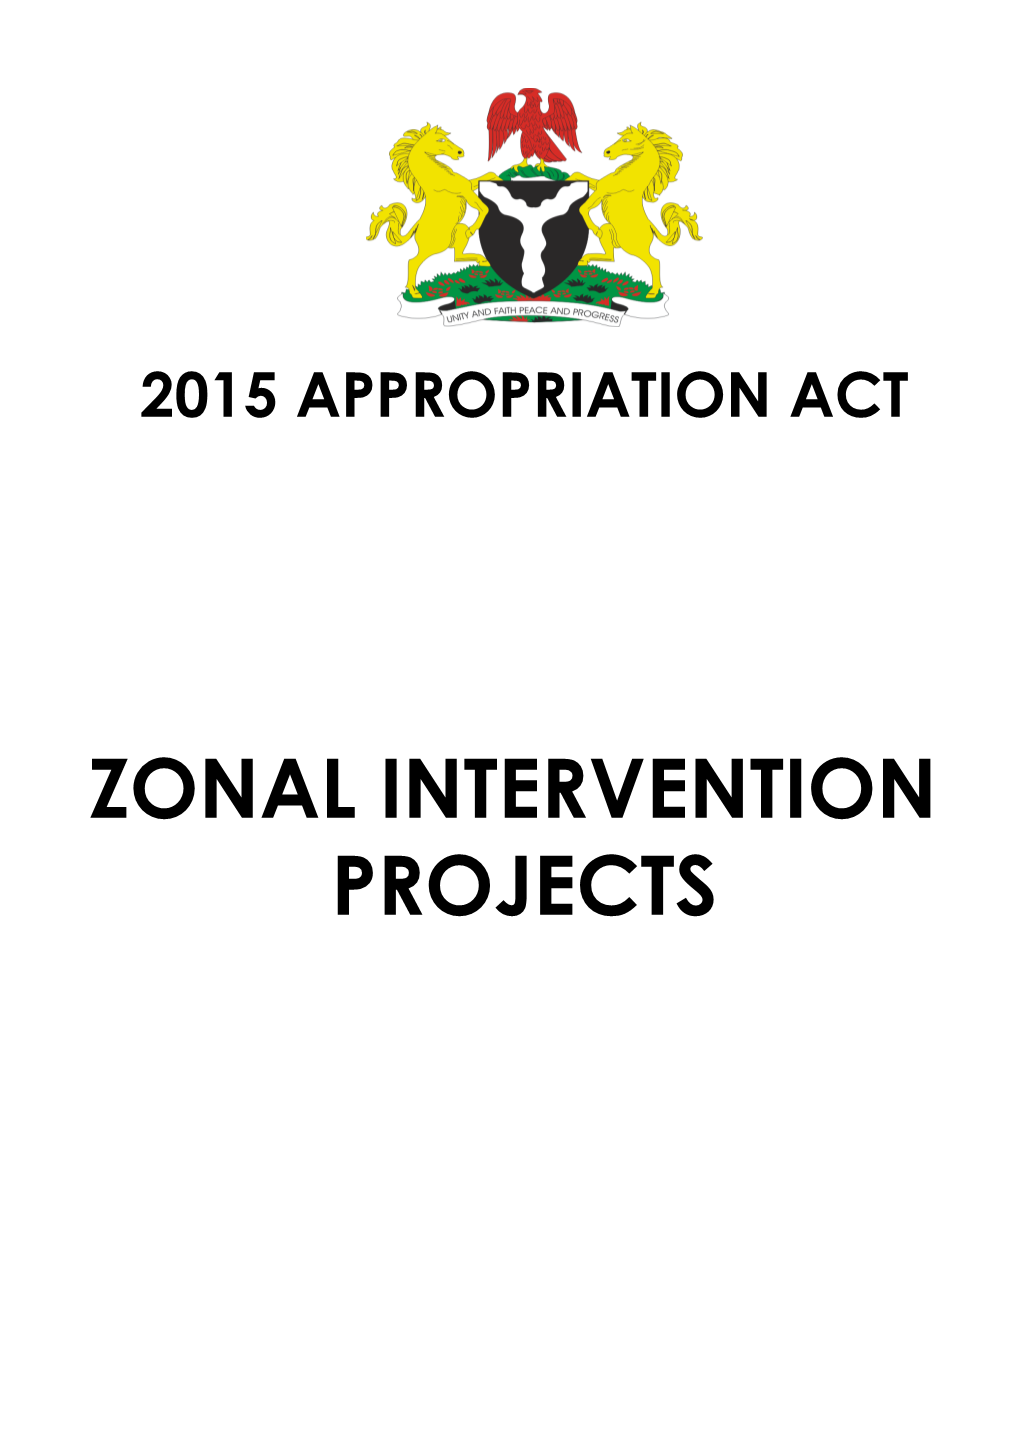 ZONAL INTERVENTION PROJECTS Feneral Government of Nigeria APPROPRIATION ACT